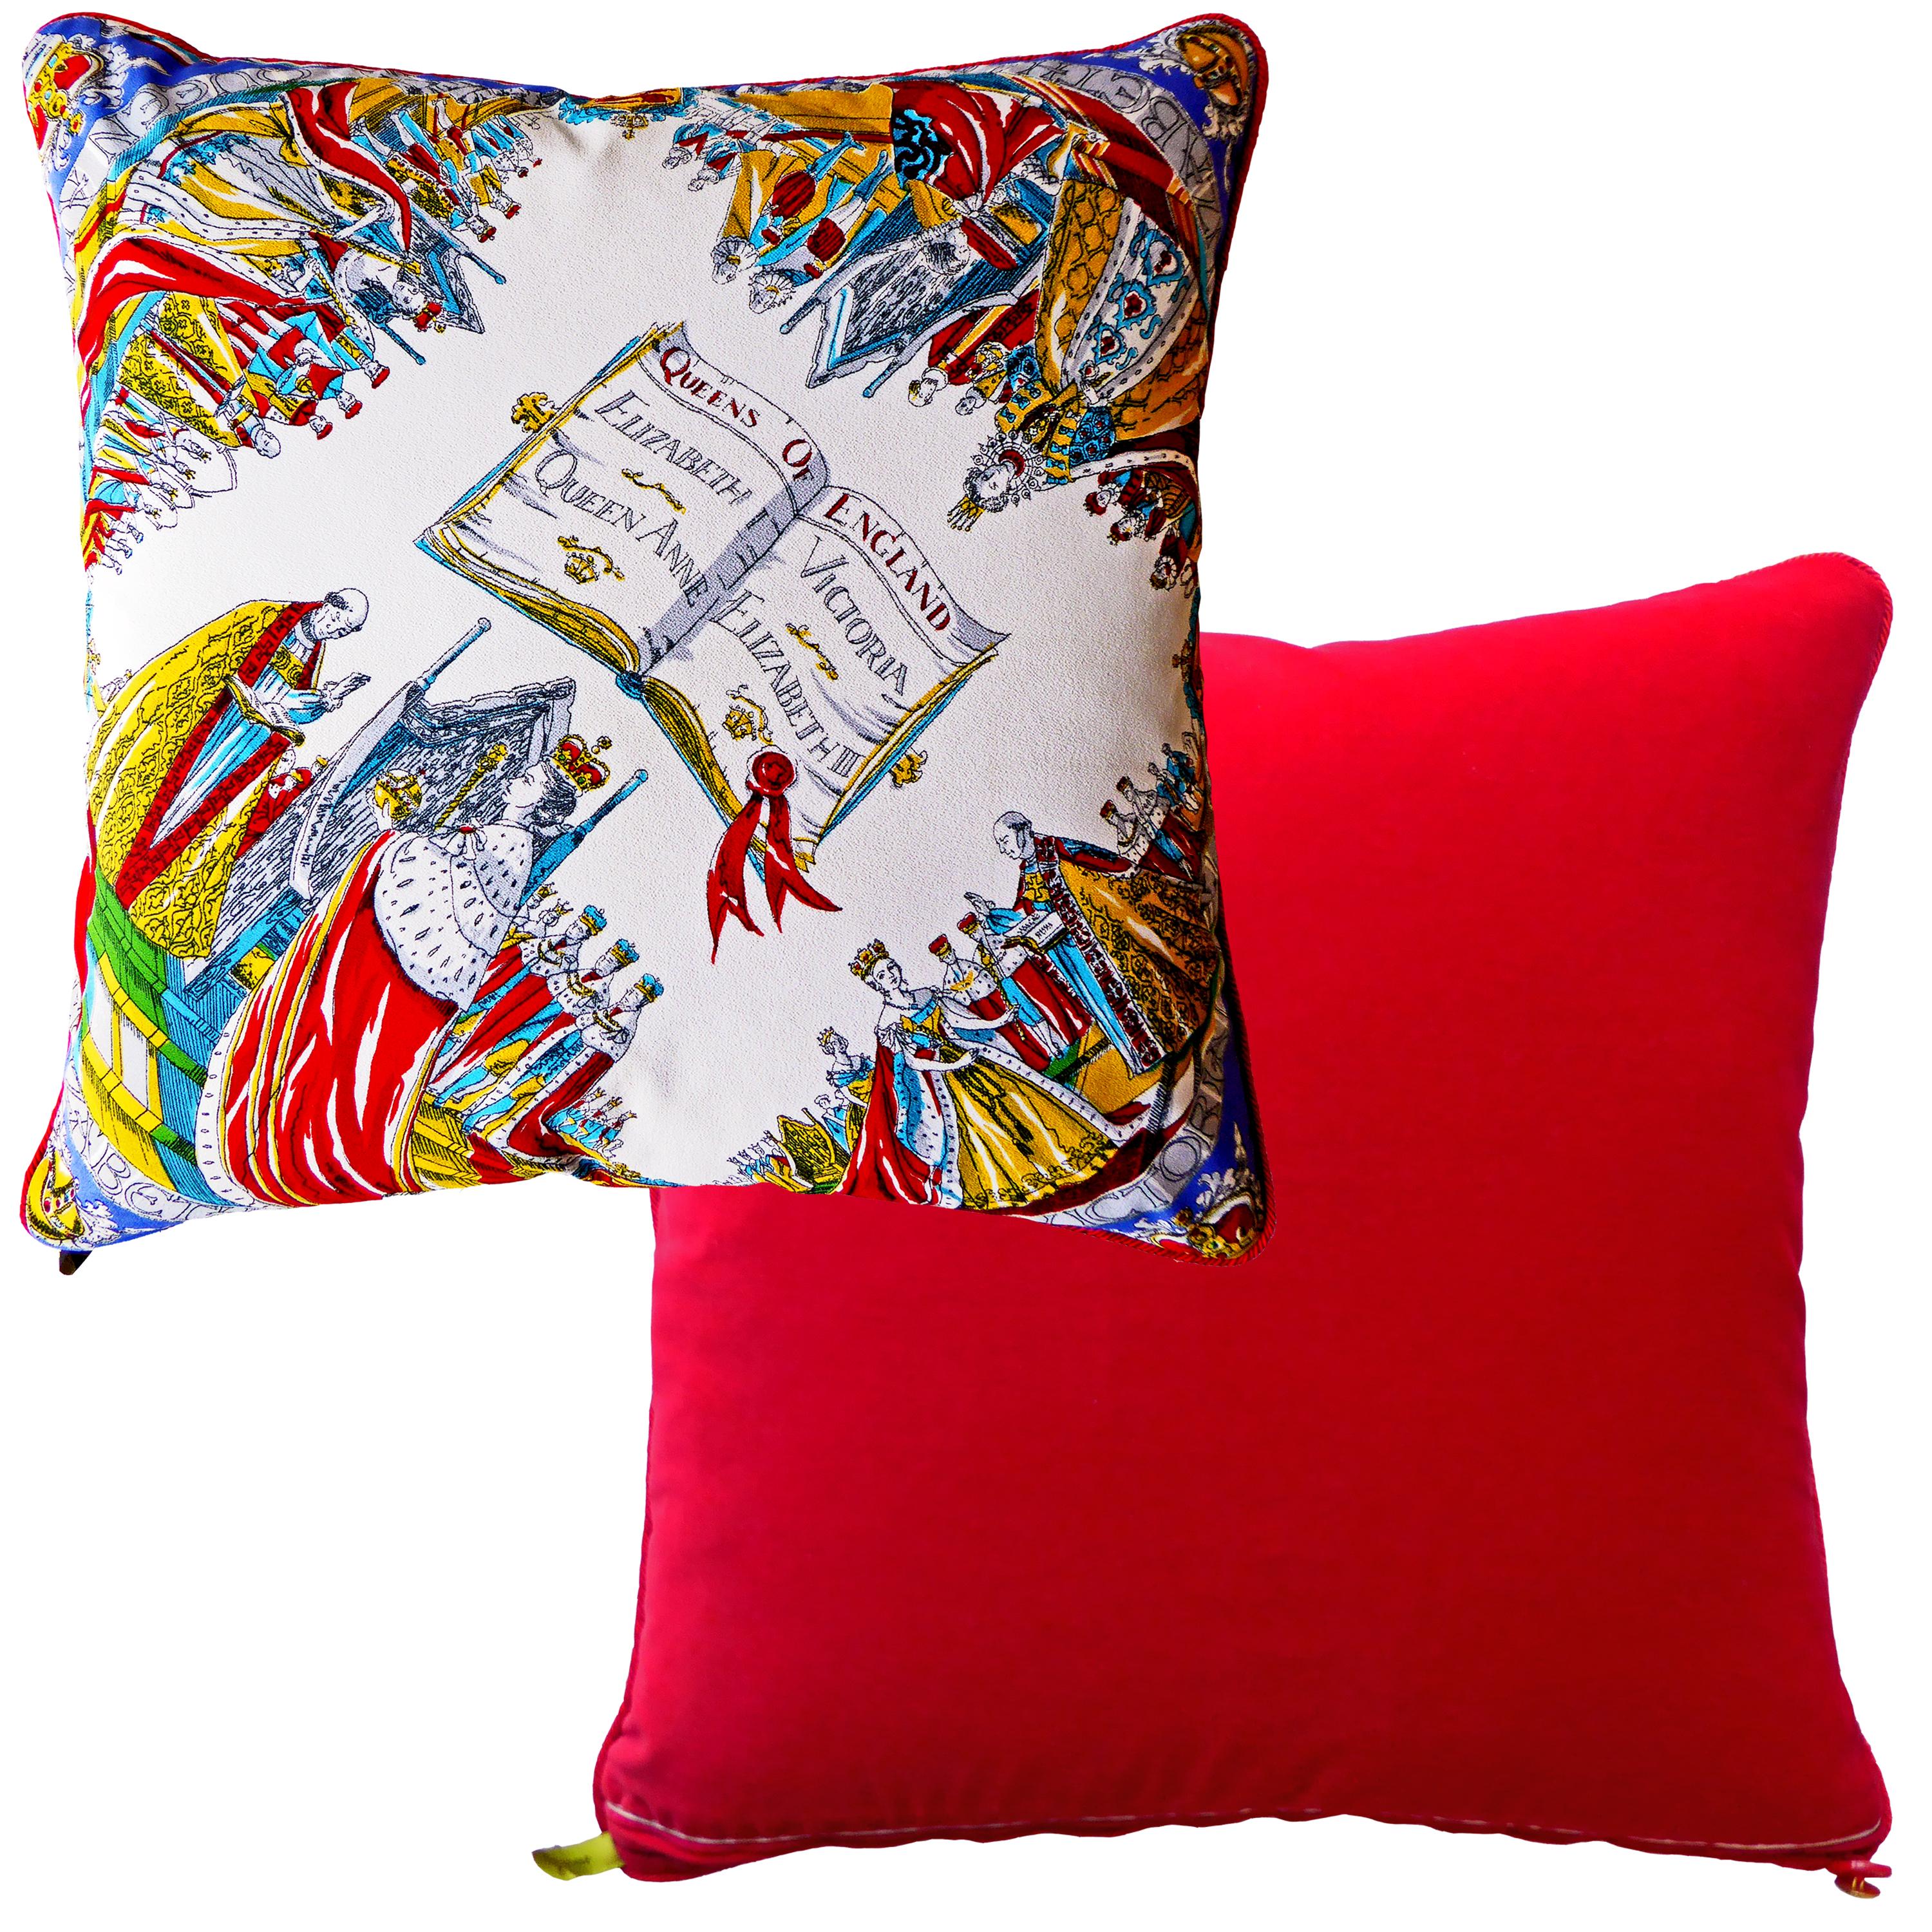 Mid-Century Modern Vintage Cushions, 'The Queens of England' Bespoke-Made Pillow, Made in UK